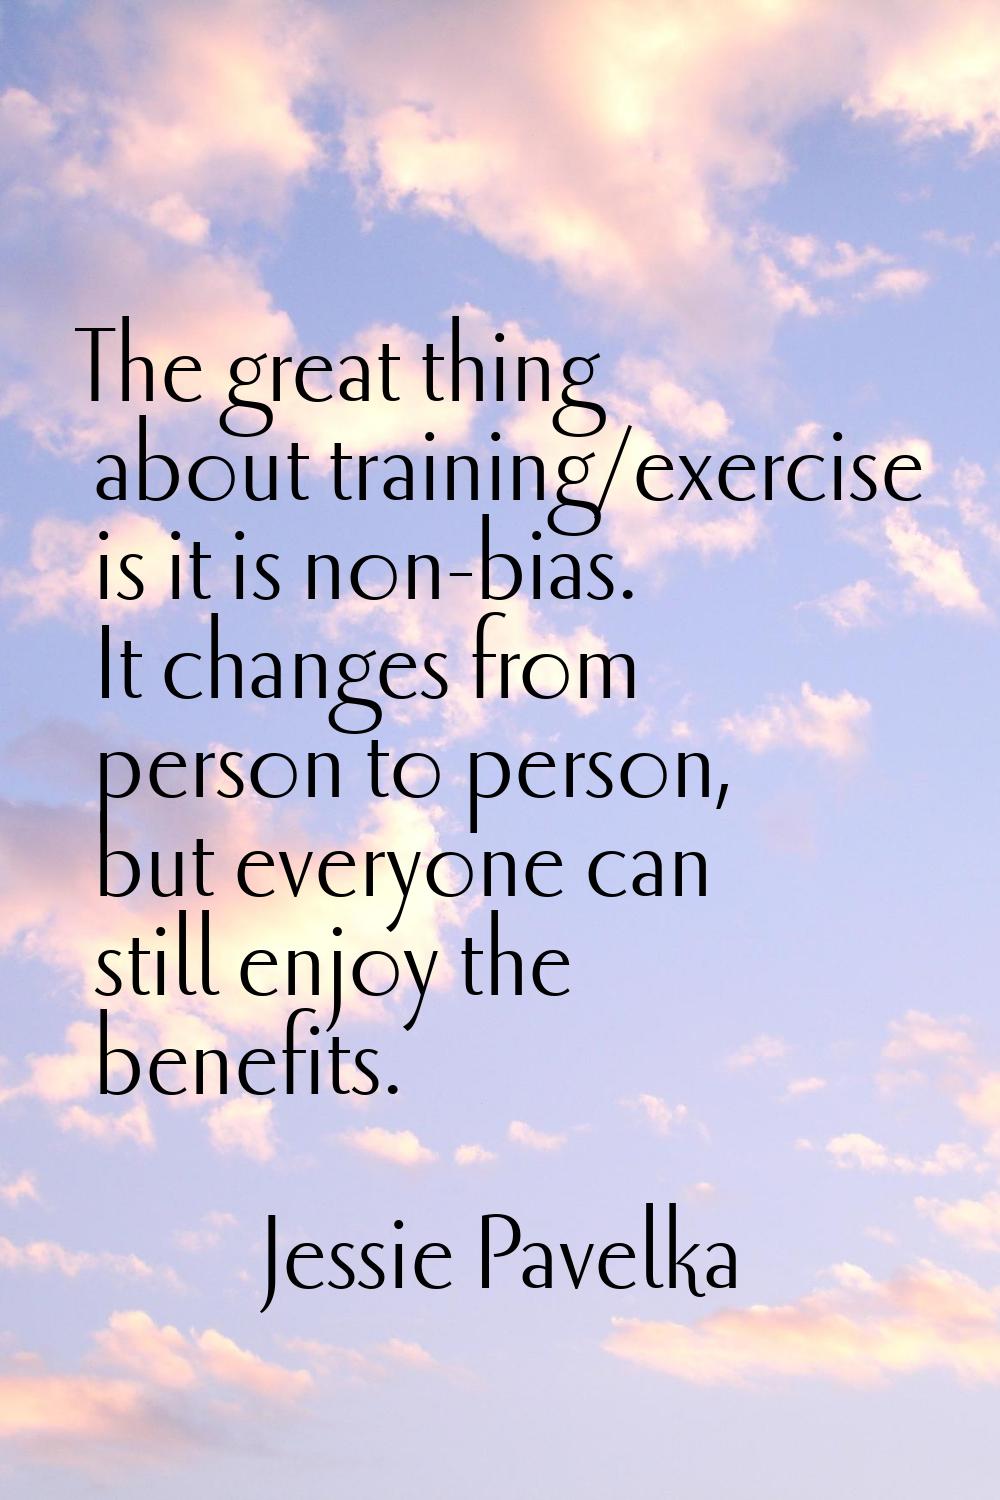 The great thing about training/exercise is it is non-bias. It changes from person to person, but ev